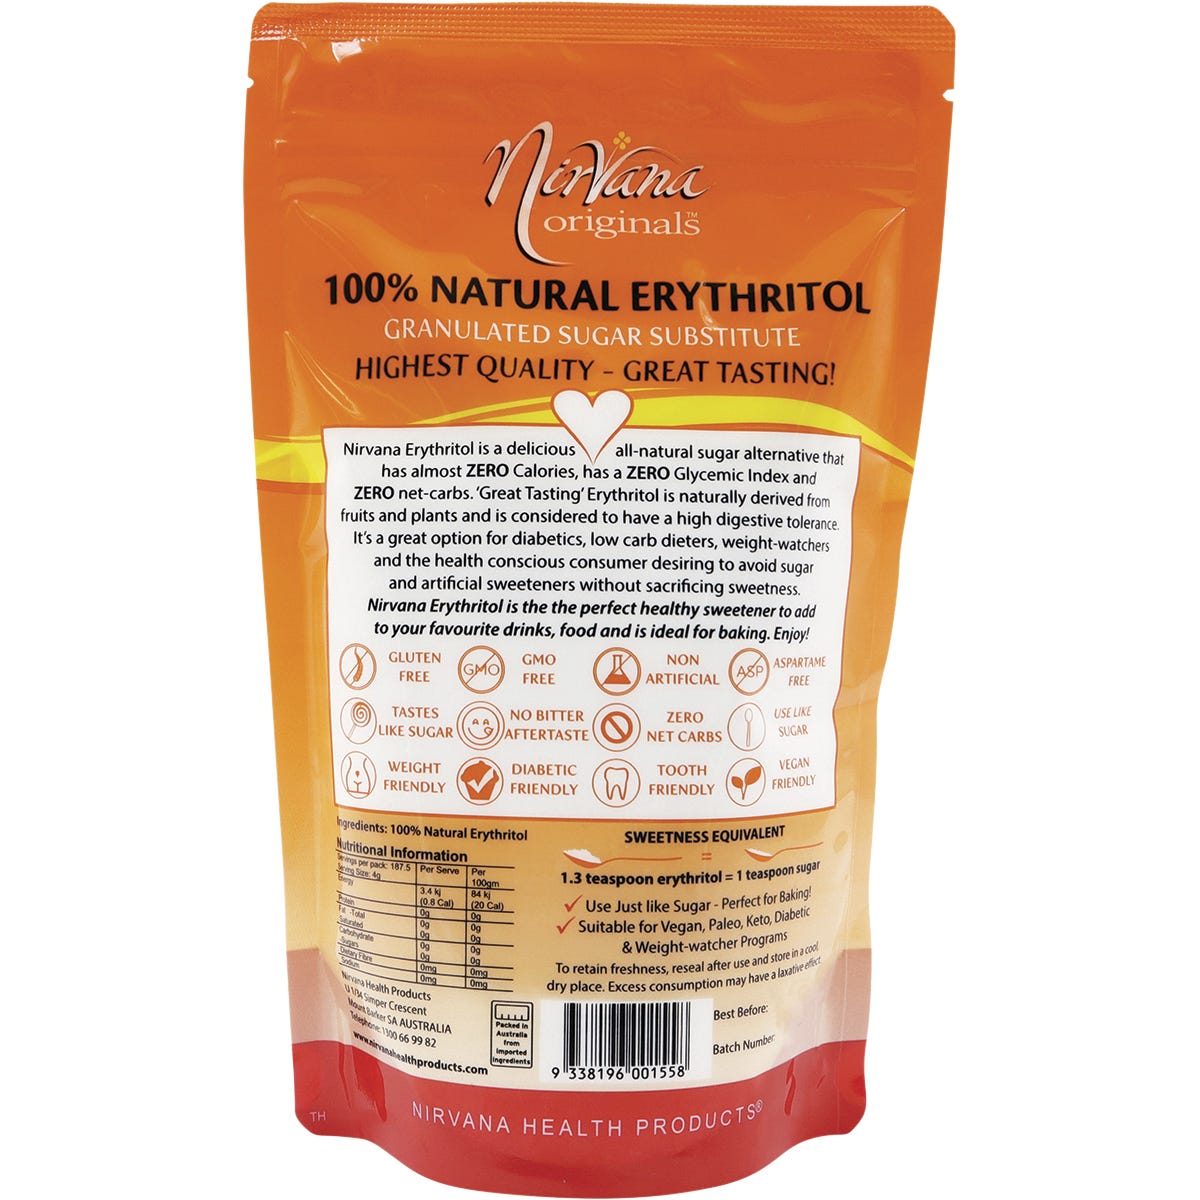 Nirvana Originals Erythritol 100% Natural 750g - Dr Earth - Sweeteners